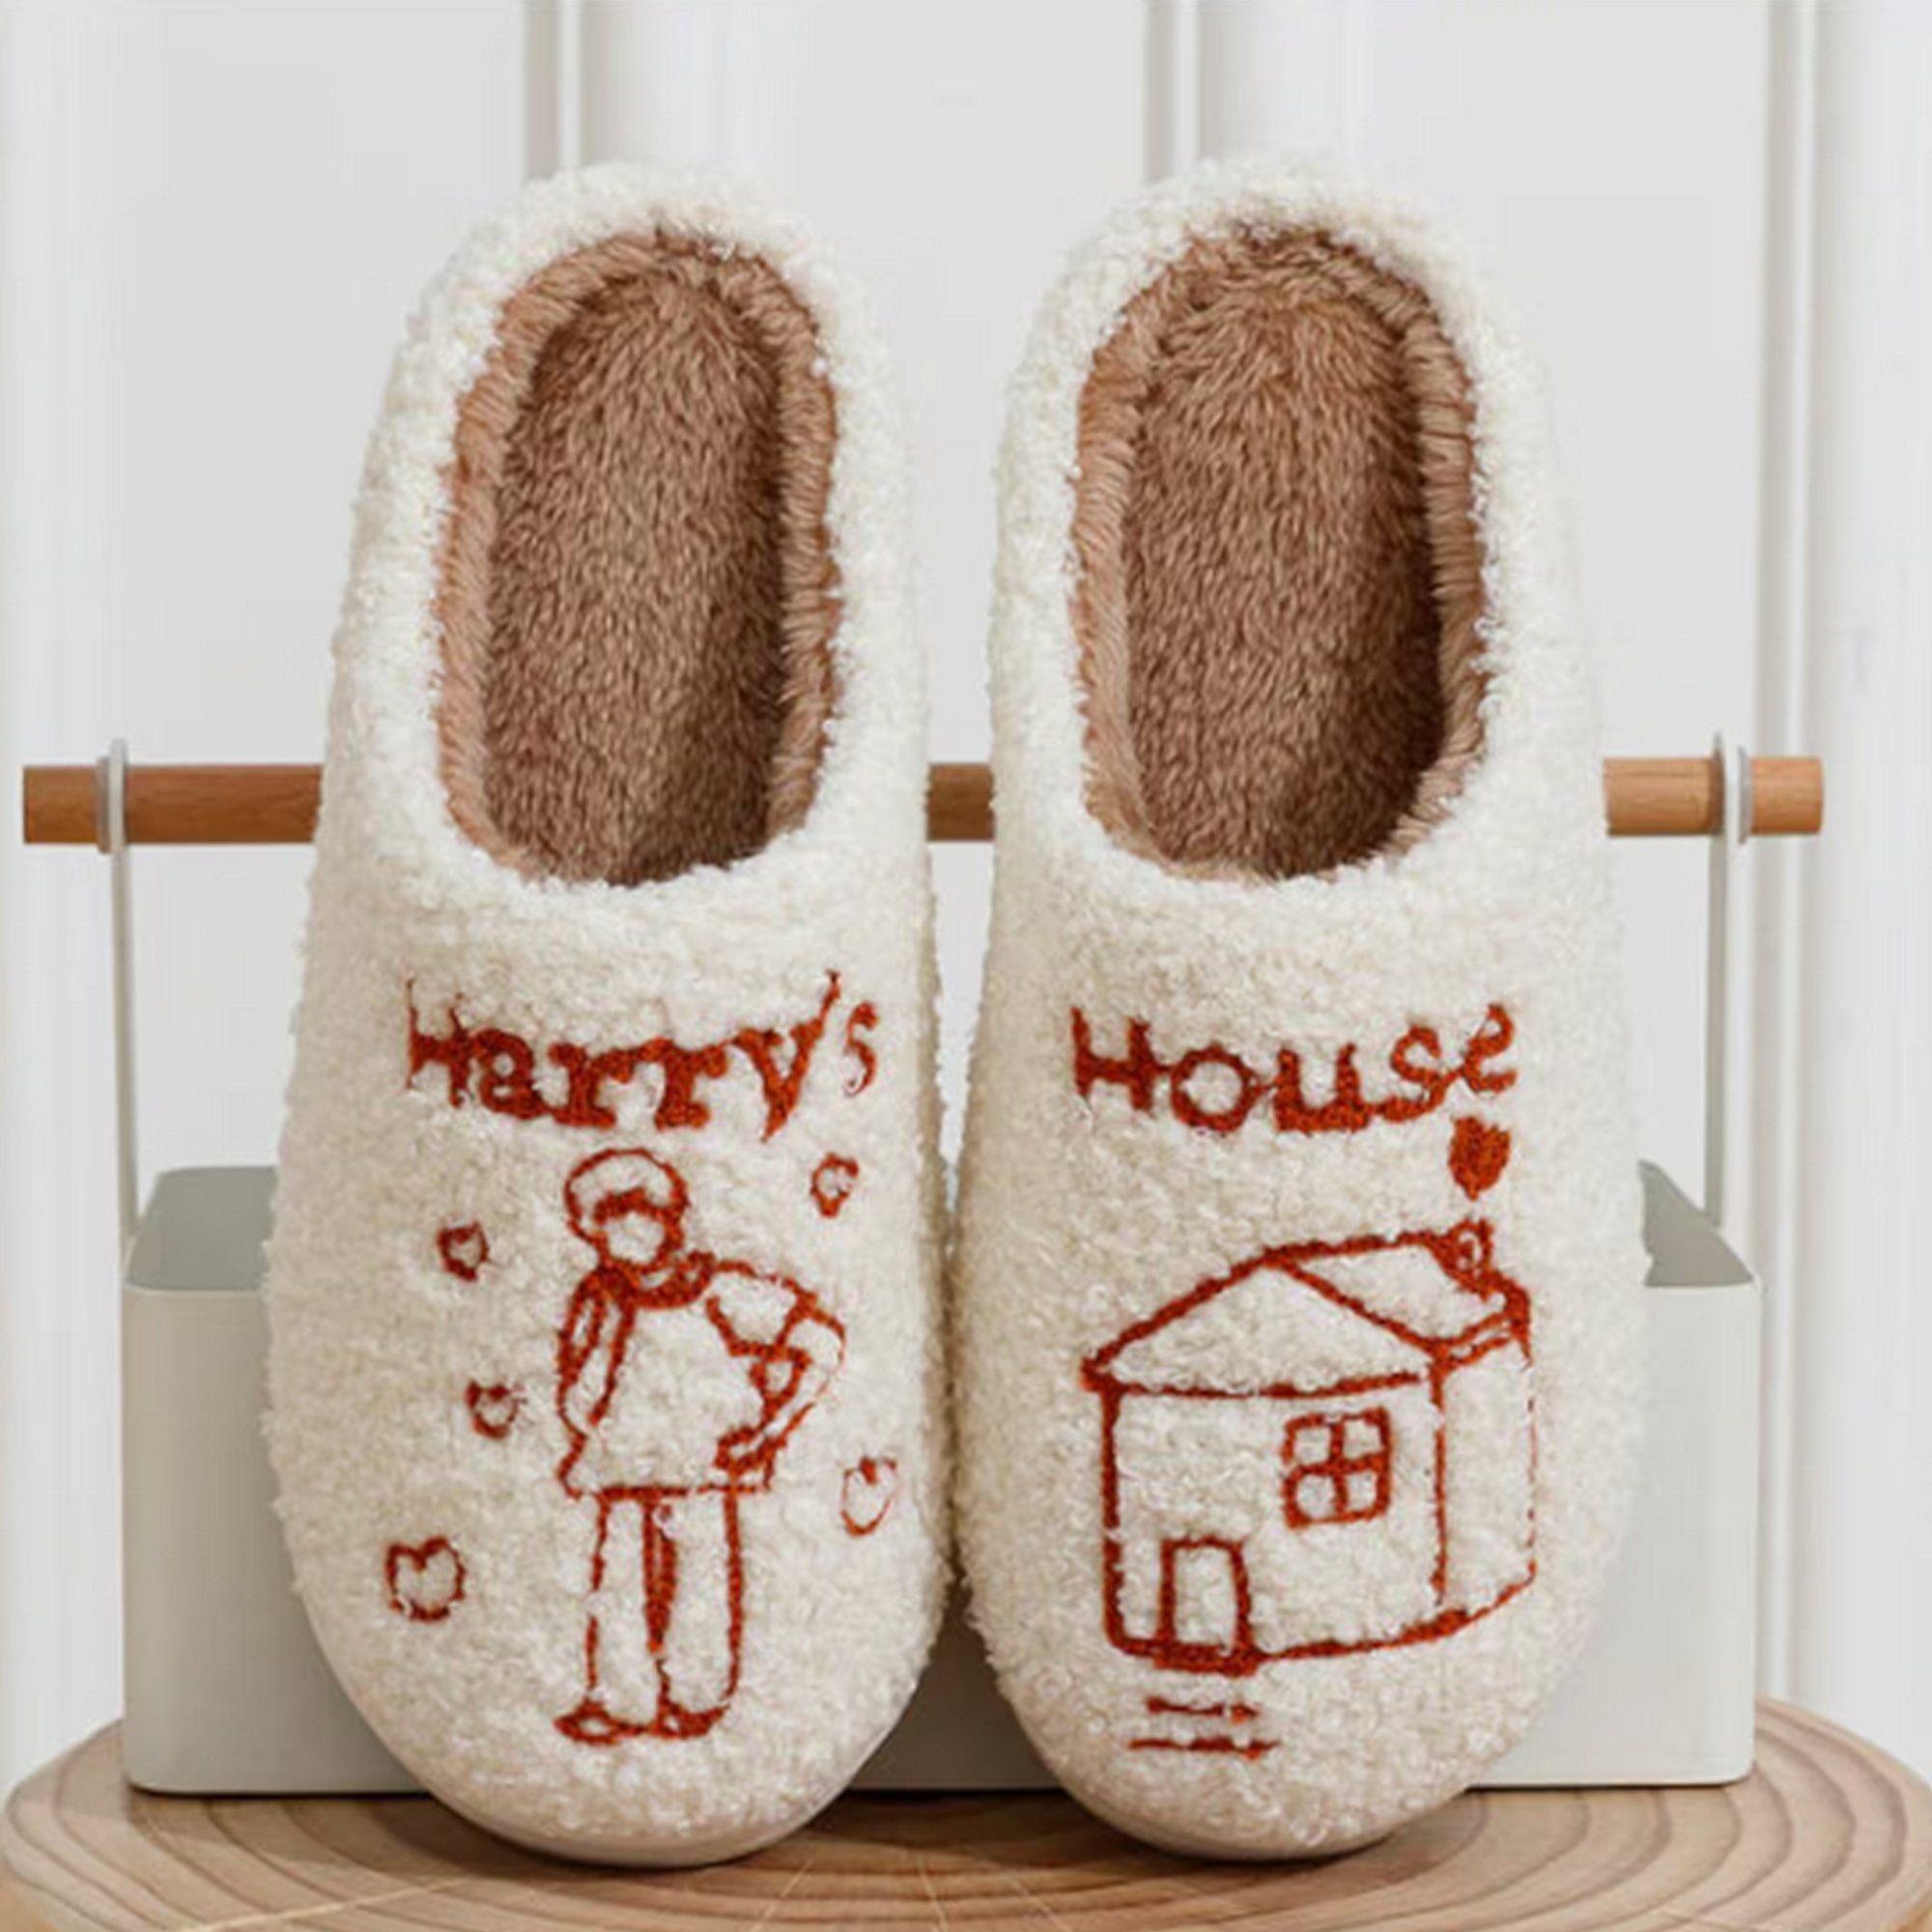 Harry Styles Slippers, Harry’s House Slippers, Love On Tour, Women’s Slippers, Harry Styles Merch, One Direction, Harry styles merch 2023, harry styles slippers 2023, harry styles tour merch